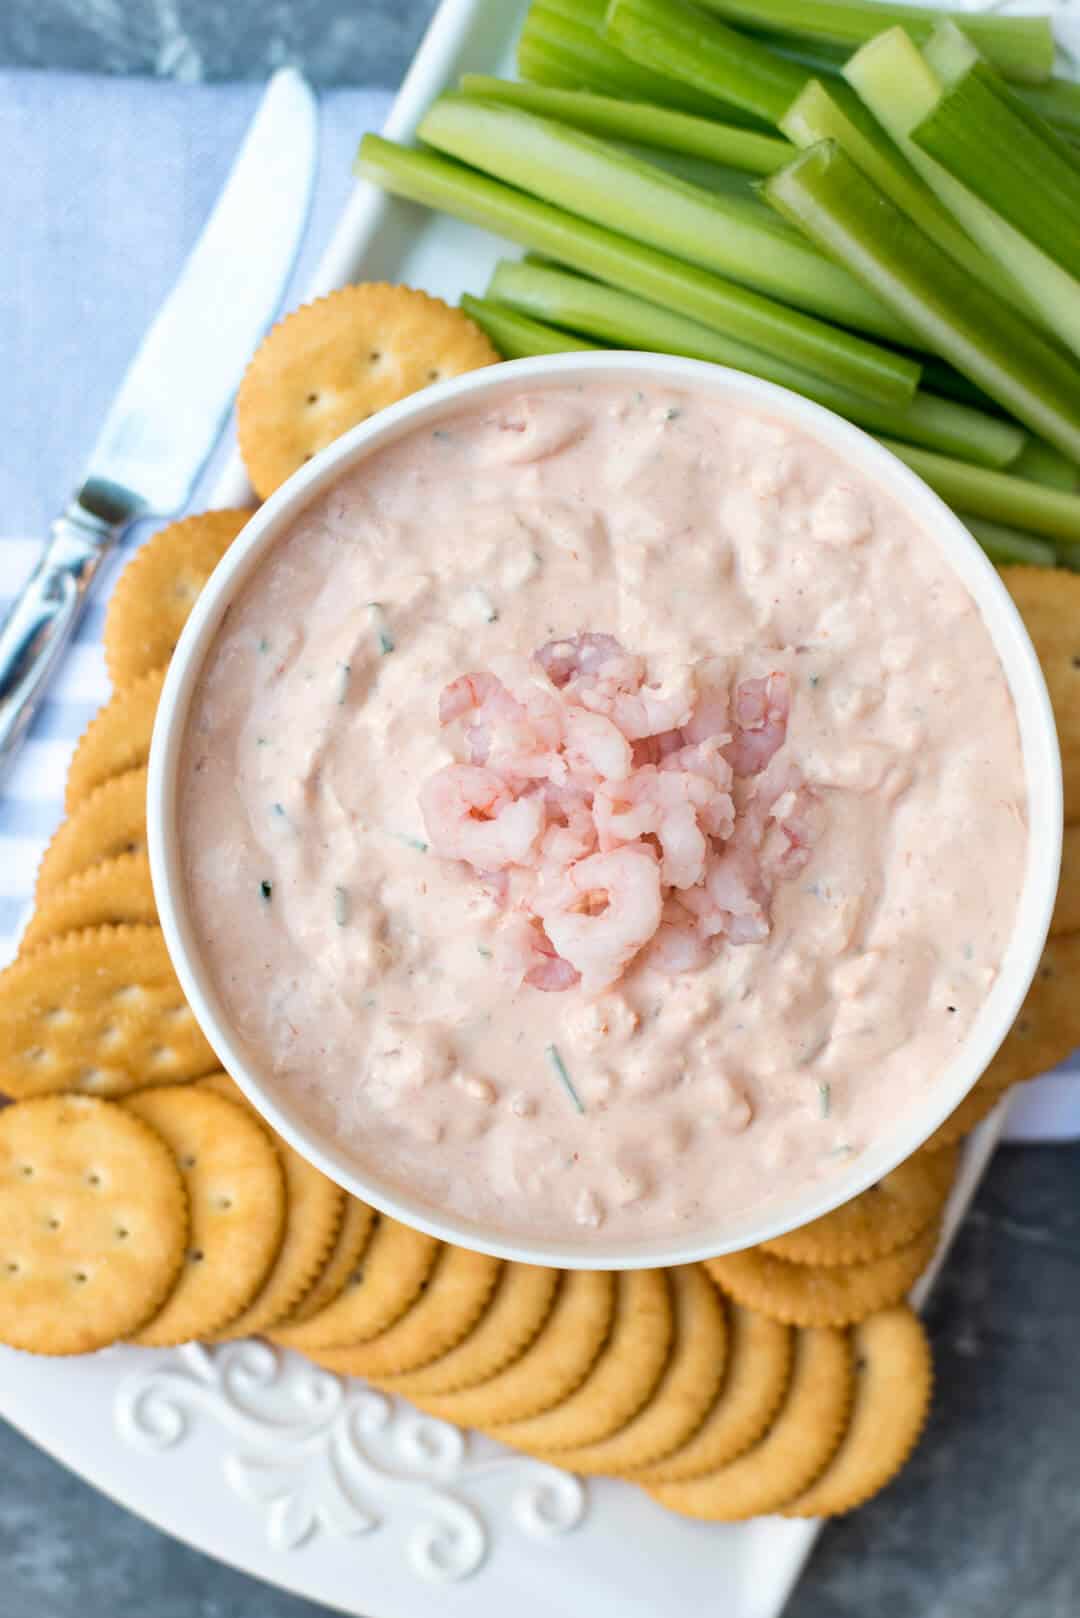 An over the top shot of Shrimp Dip on a platter with Ritz Crackers and celery sticks.